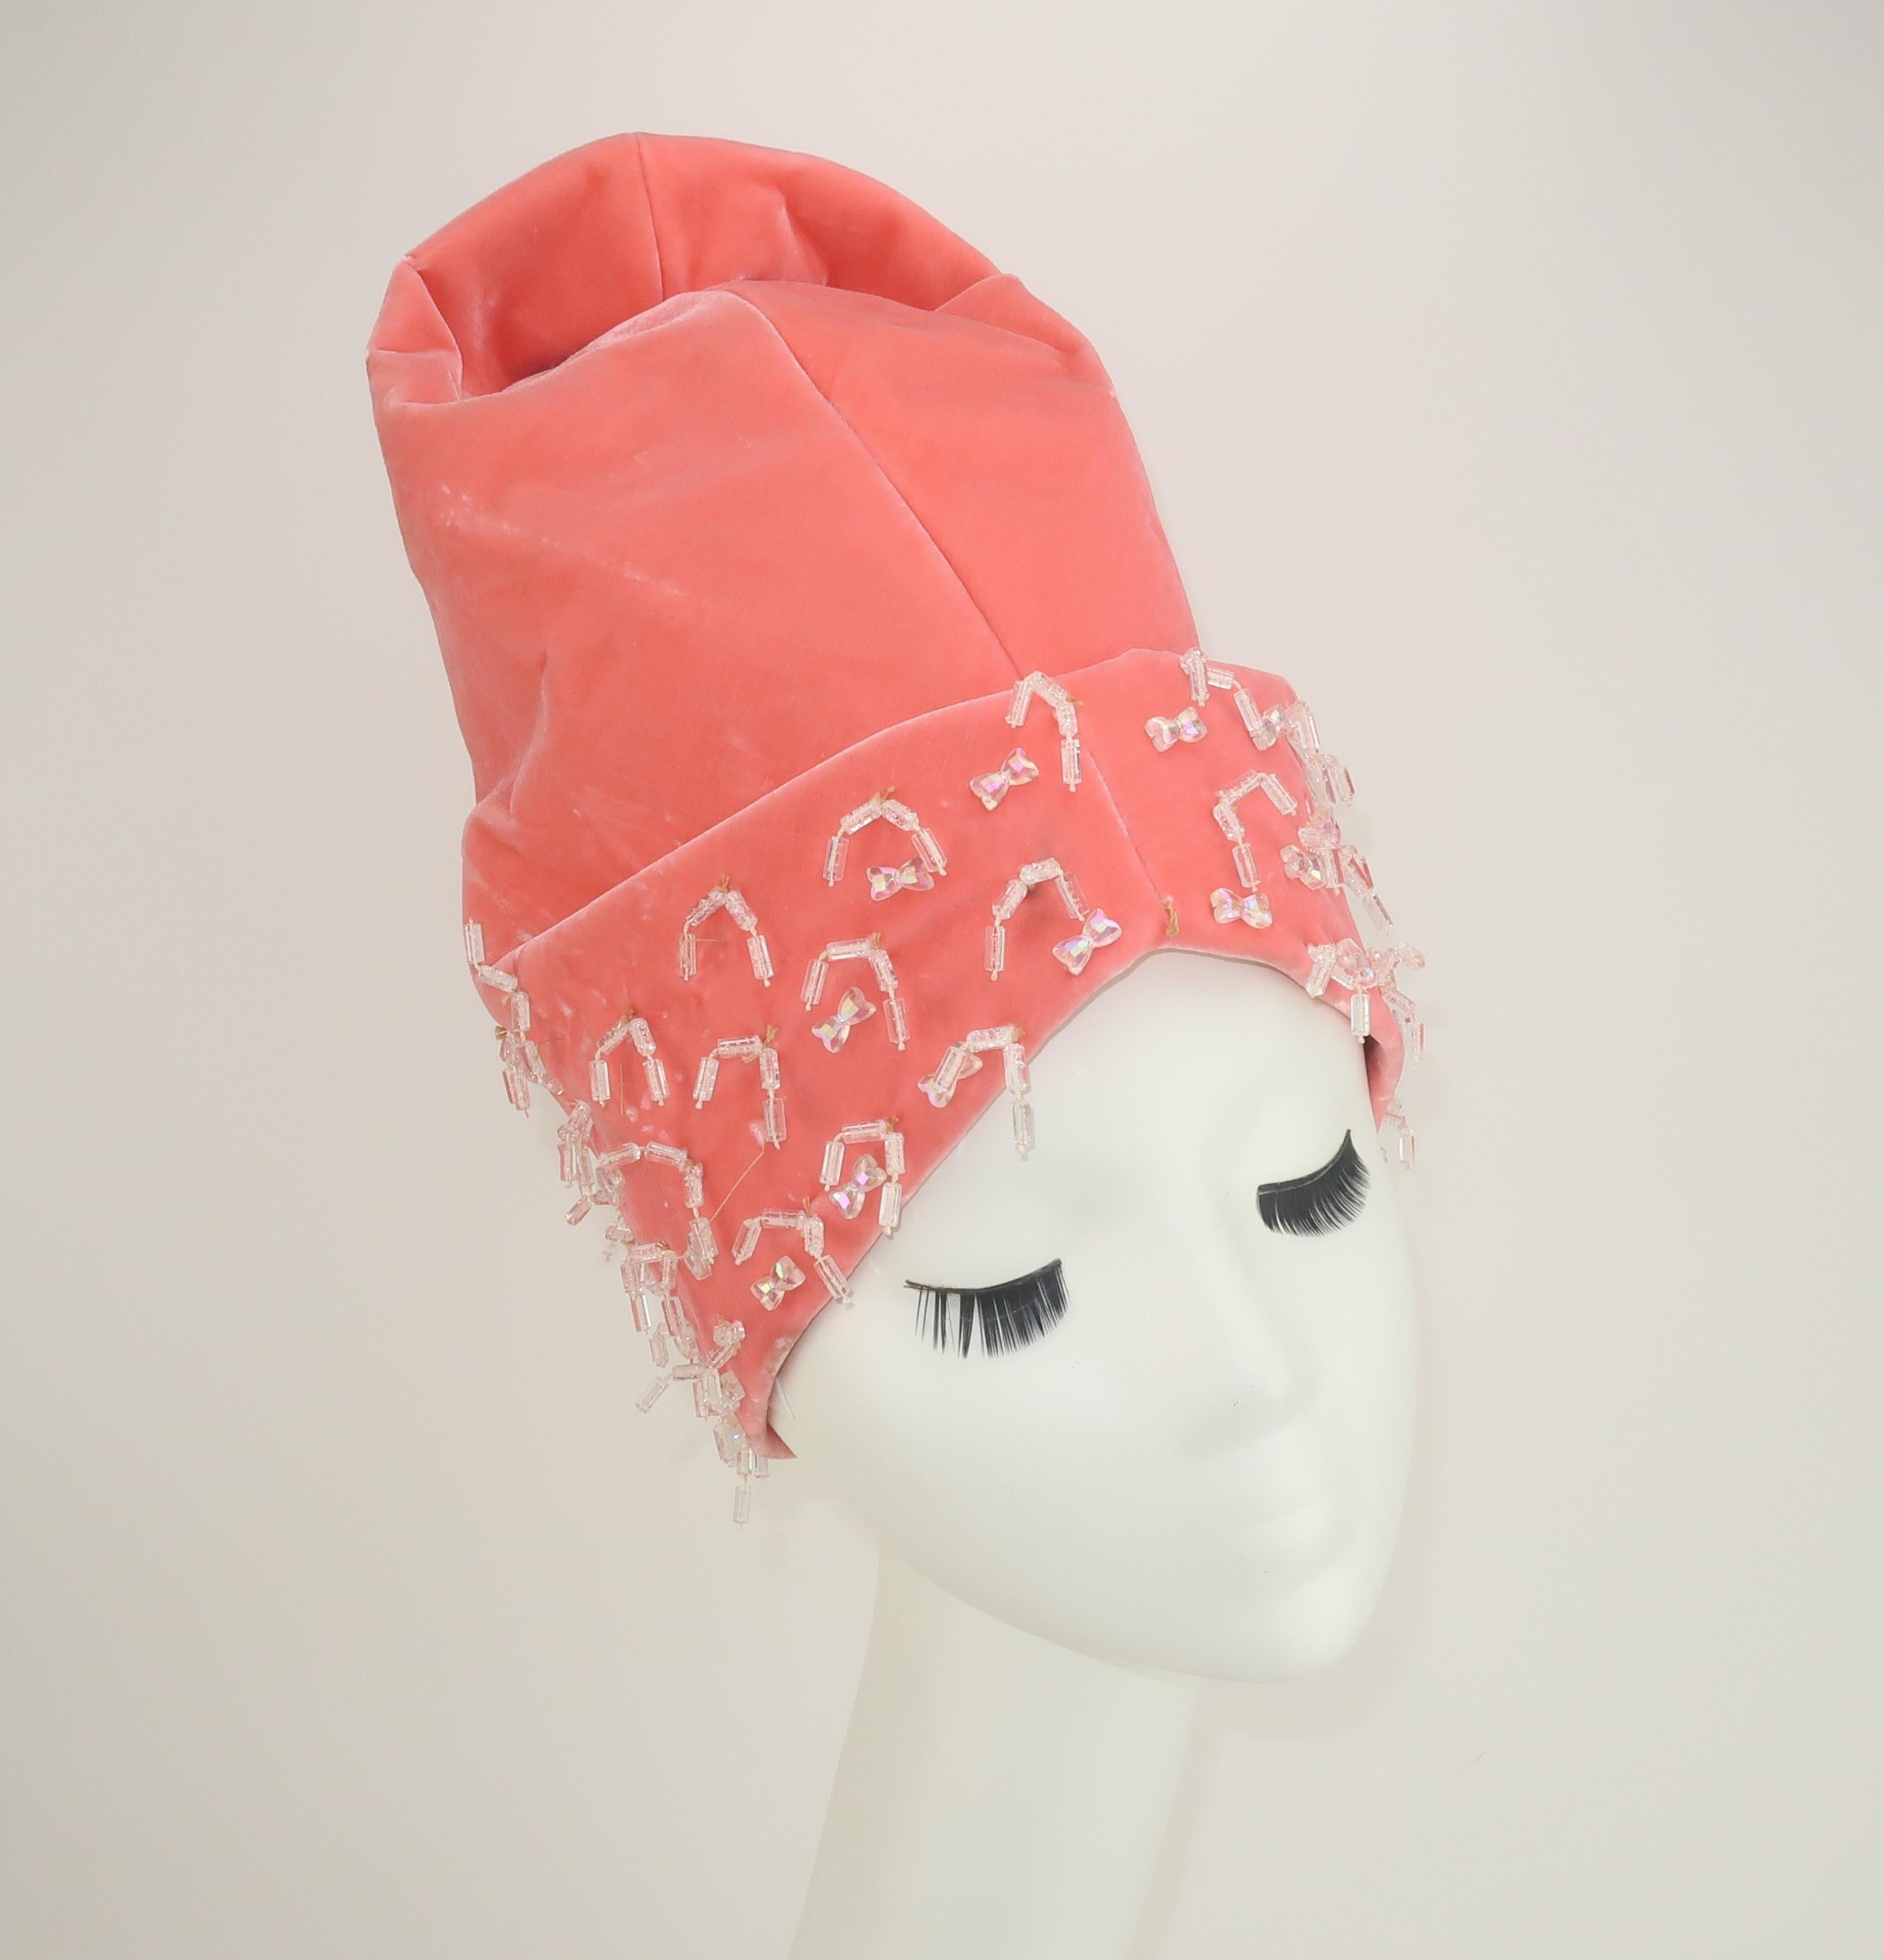 1965 custom Archie Eason turban hat designed for Betty Foy Sanders, former First Lady of Georgia.  Mr. Eason was originally from Georgia and started his career as a milliner in the 1950’s creating unusual and one-of-kind hats for a Florida